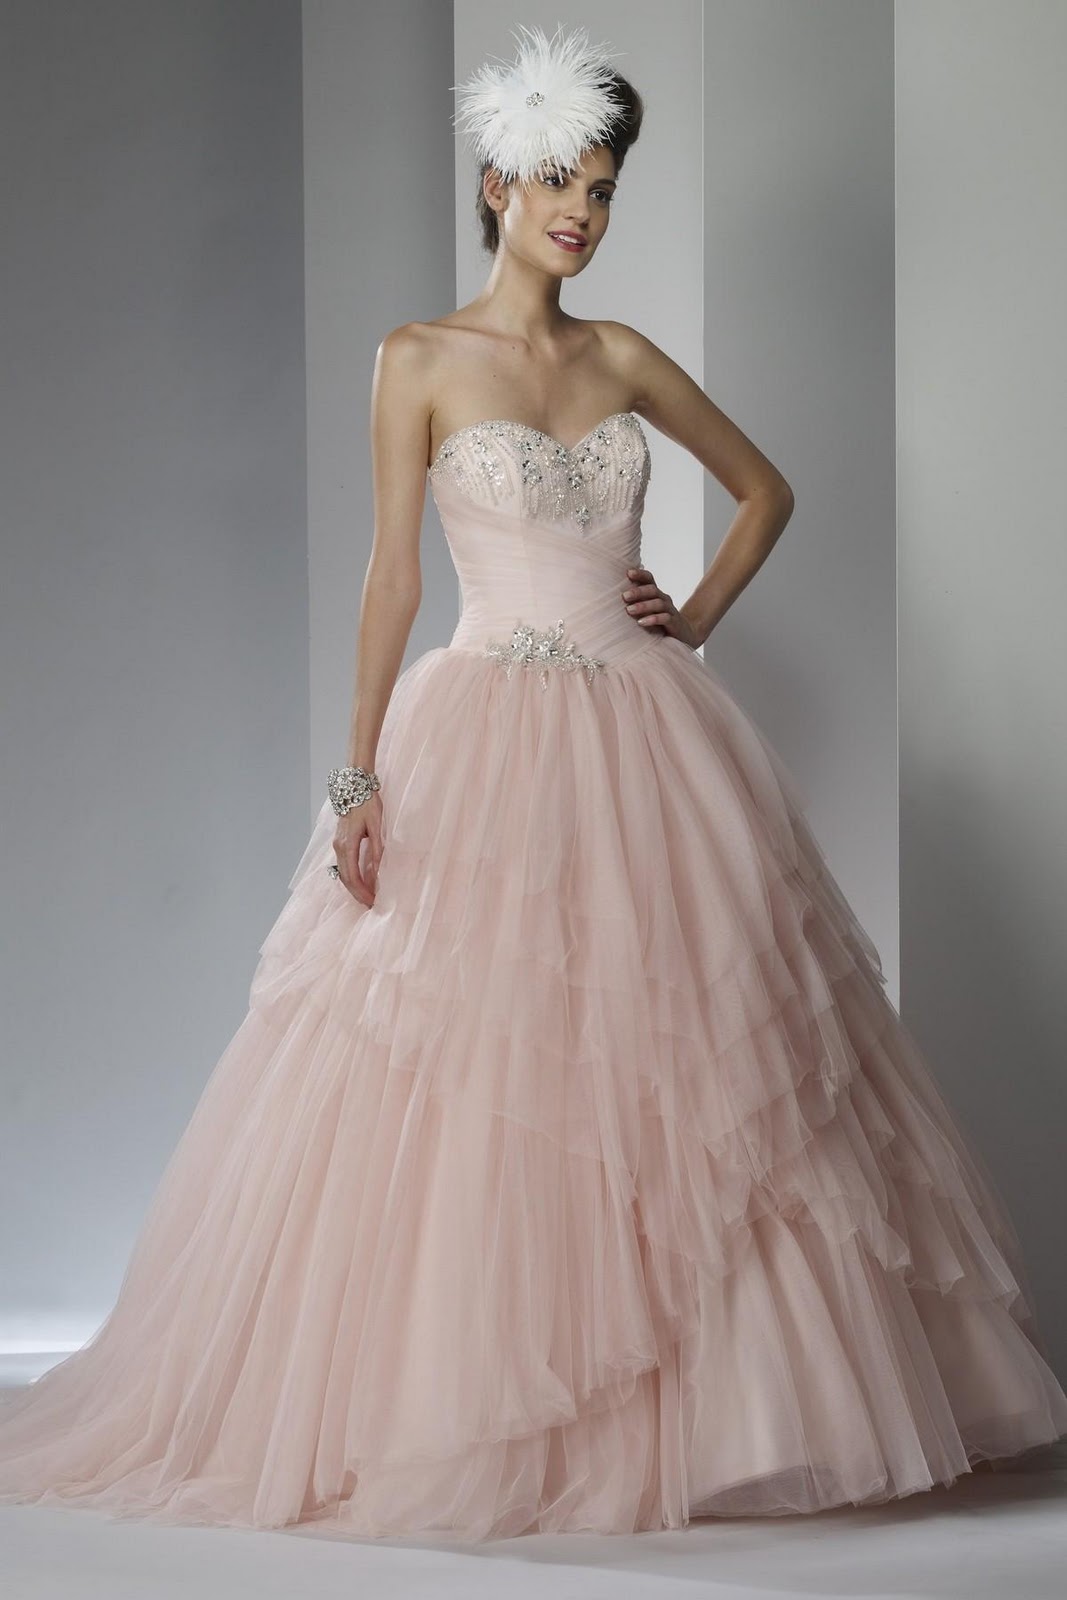 See Larger image    Ballgown